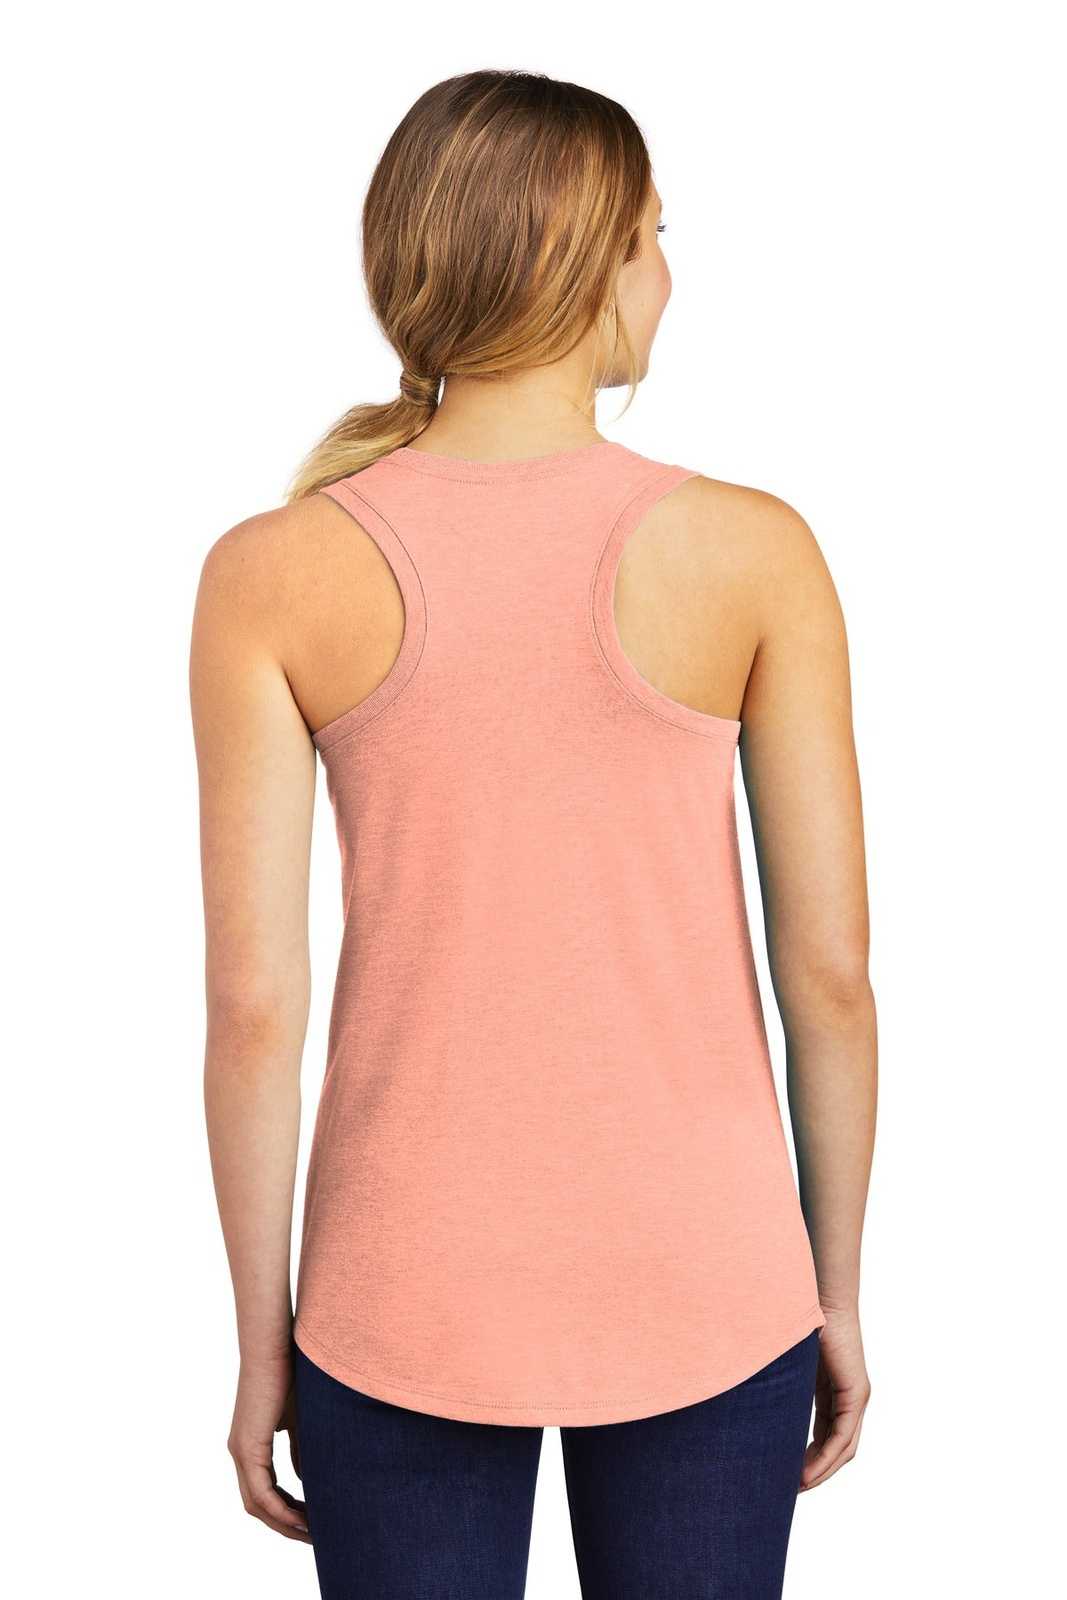 District DM138L Women's Perfect Tri Racerback Tank - Heathered Dusty Peach - HIT a Double - 1